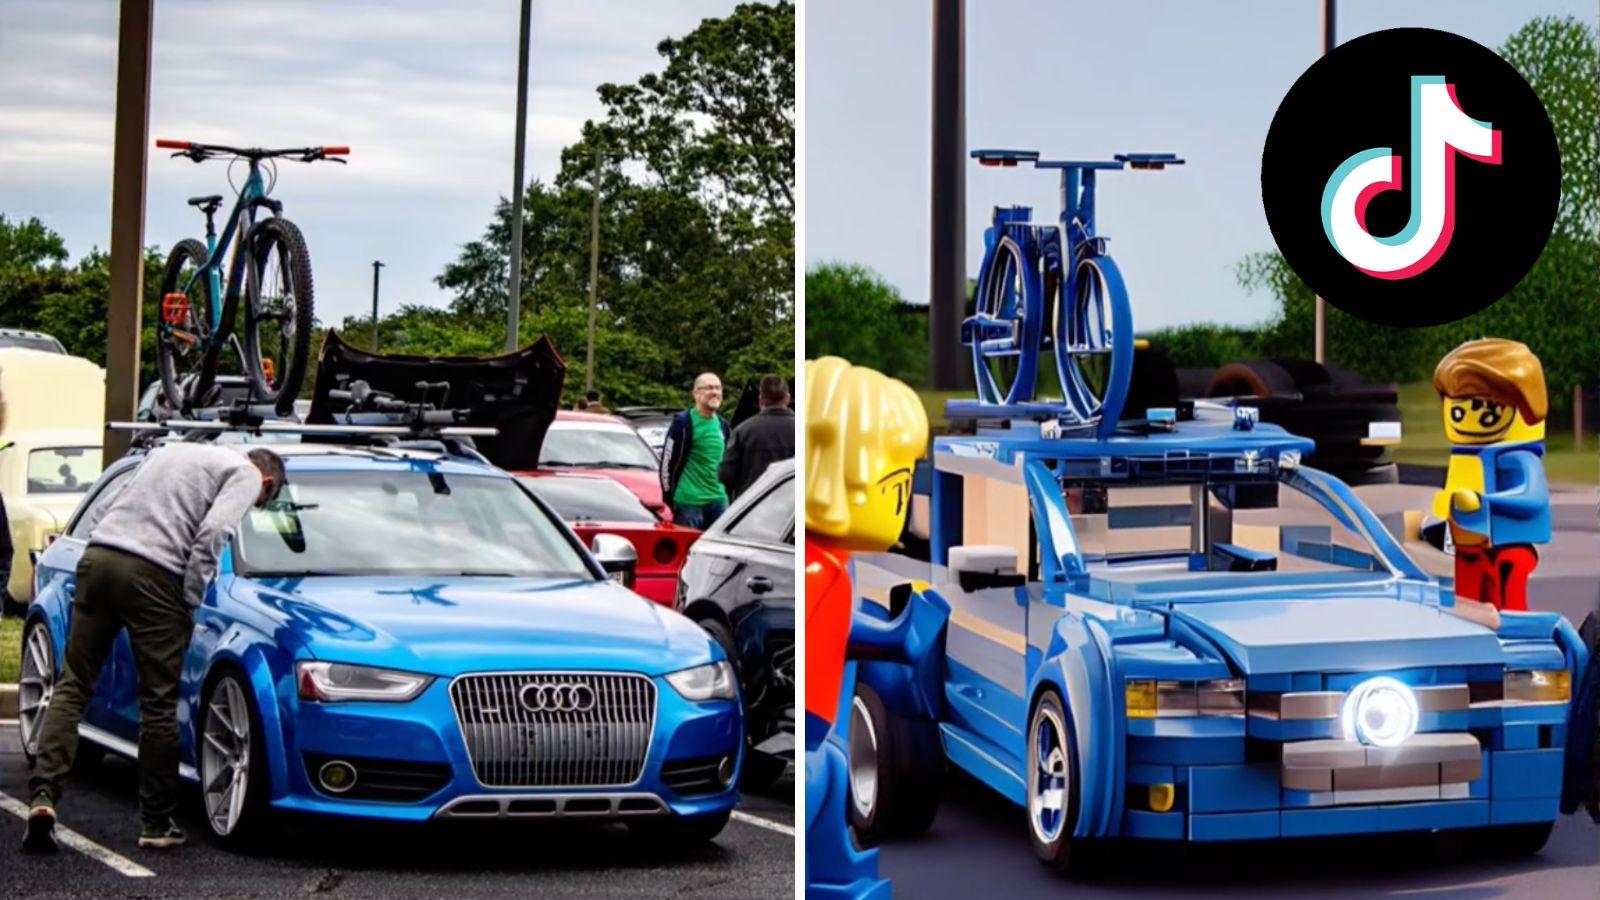 Car before and after Lego AI filter is used.